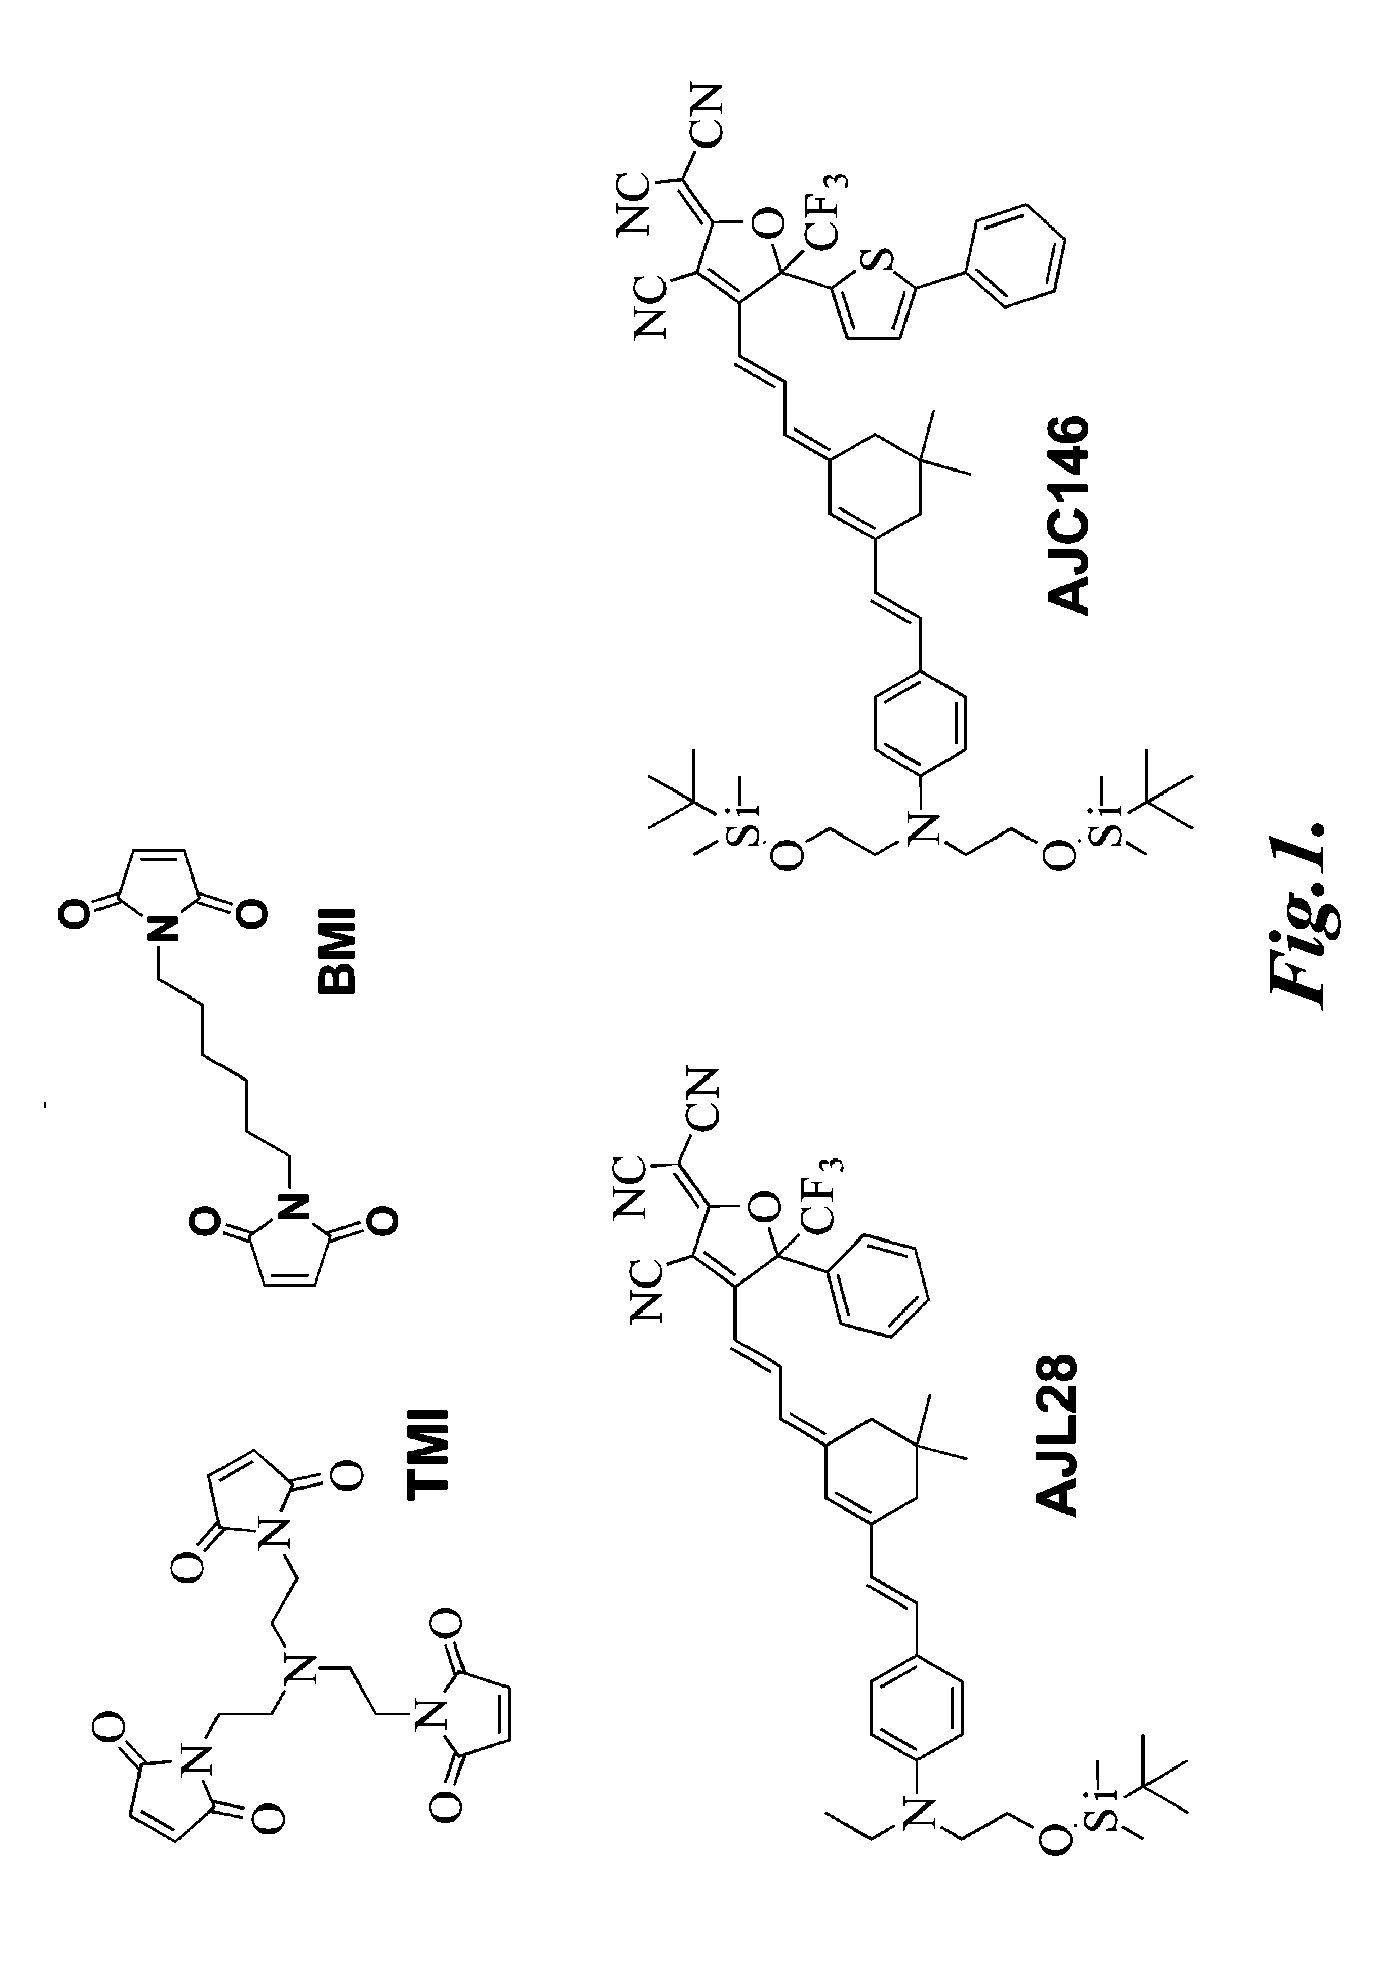 Crosslinkable polymer host having pendant nonlinear optical chromophores and containing a nonlinear optical chromophore guest